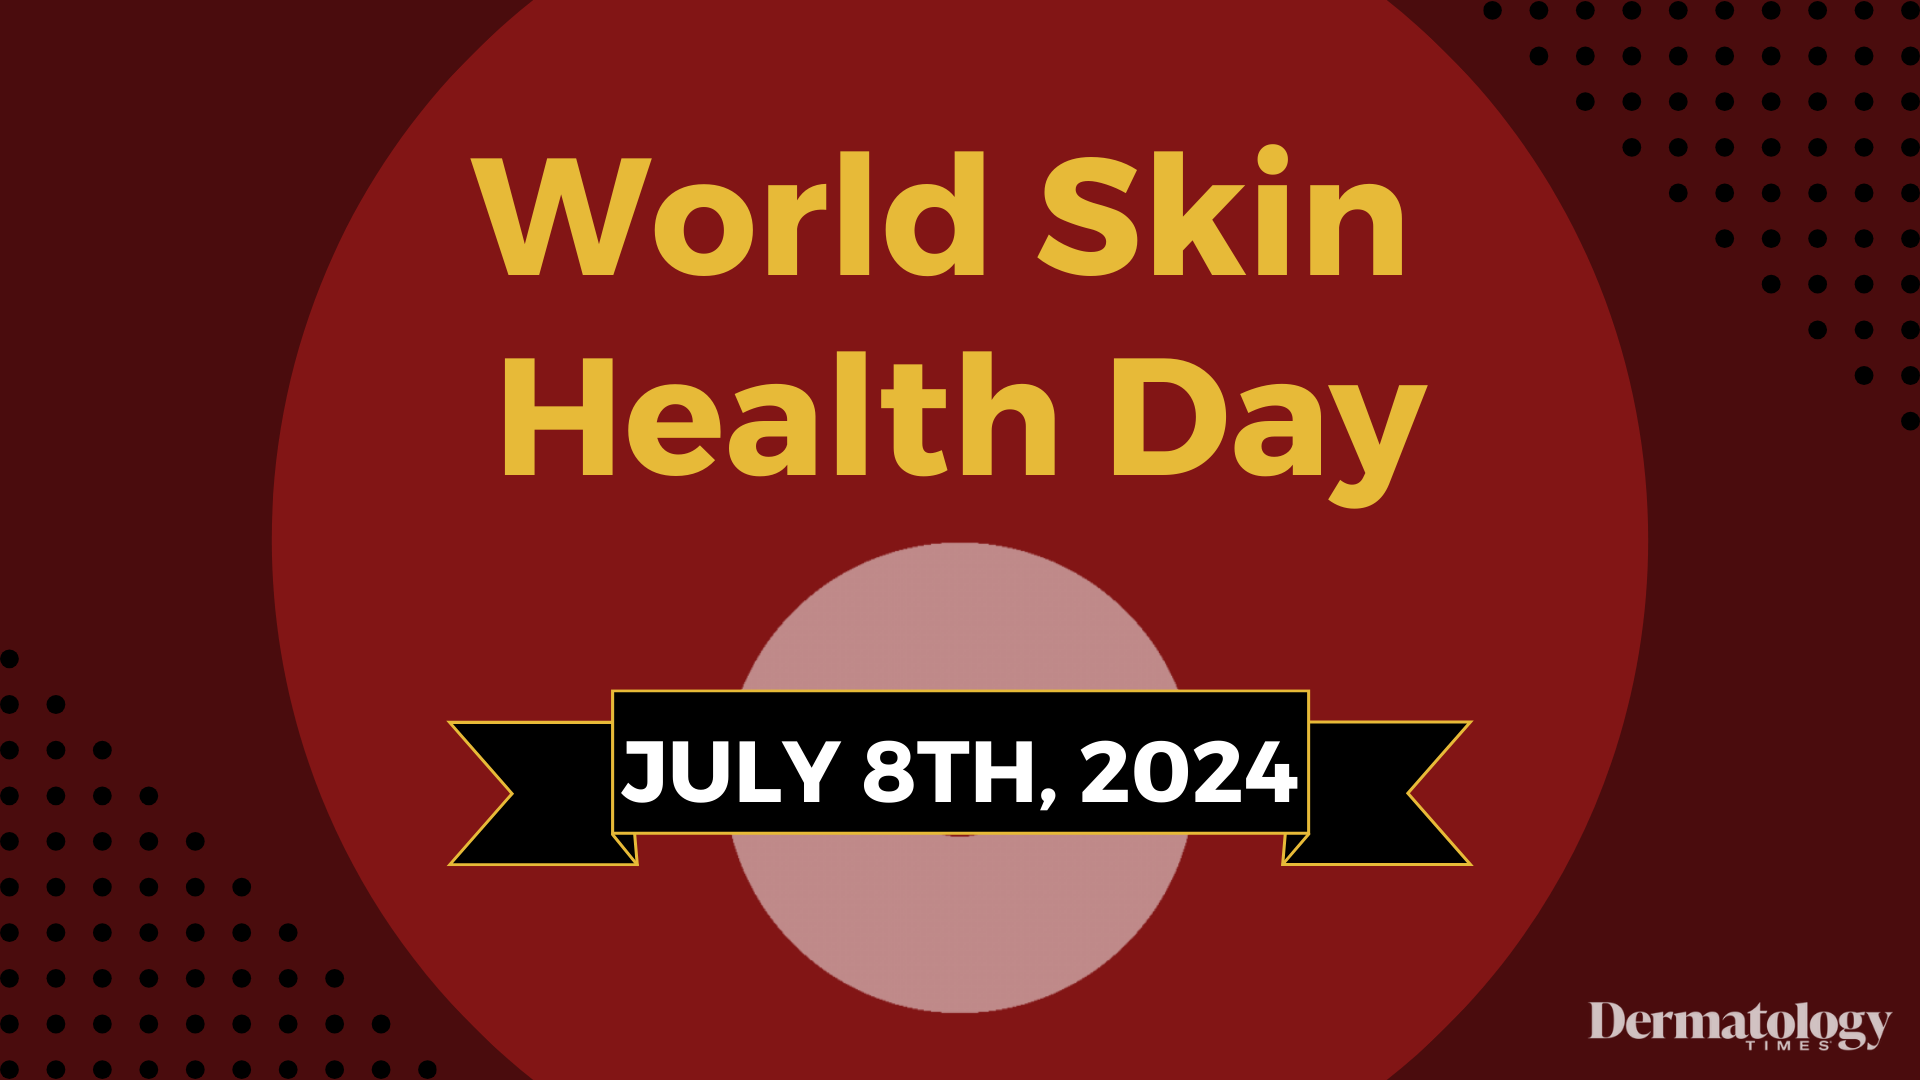 ILDS, ISD, and More Celebrate World Skin Health Day